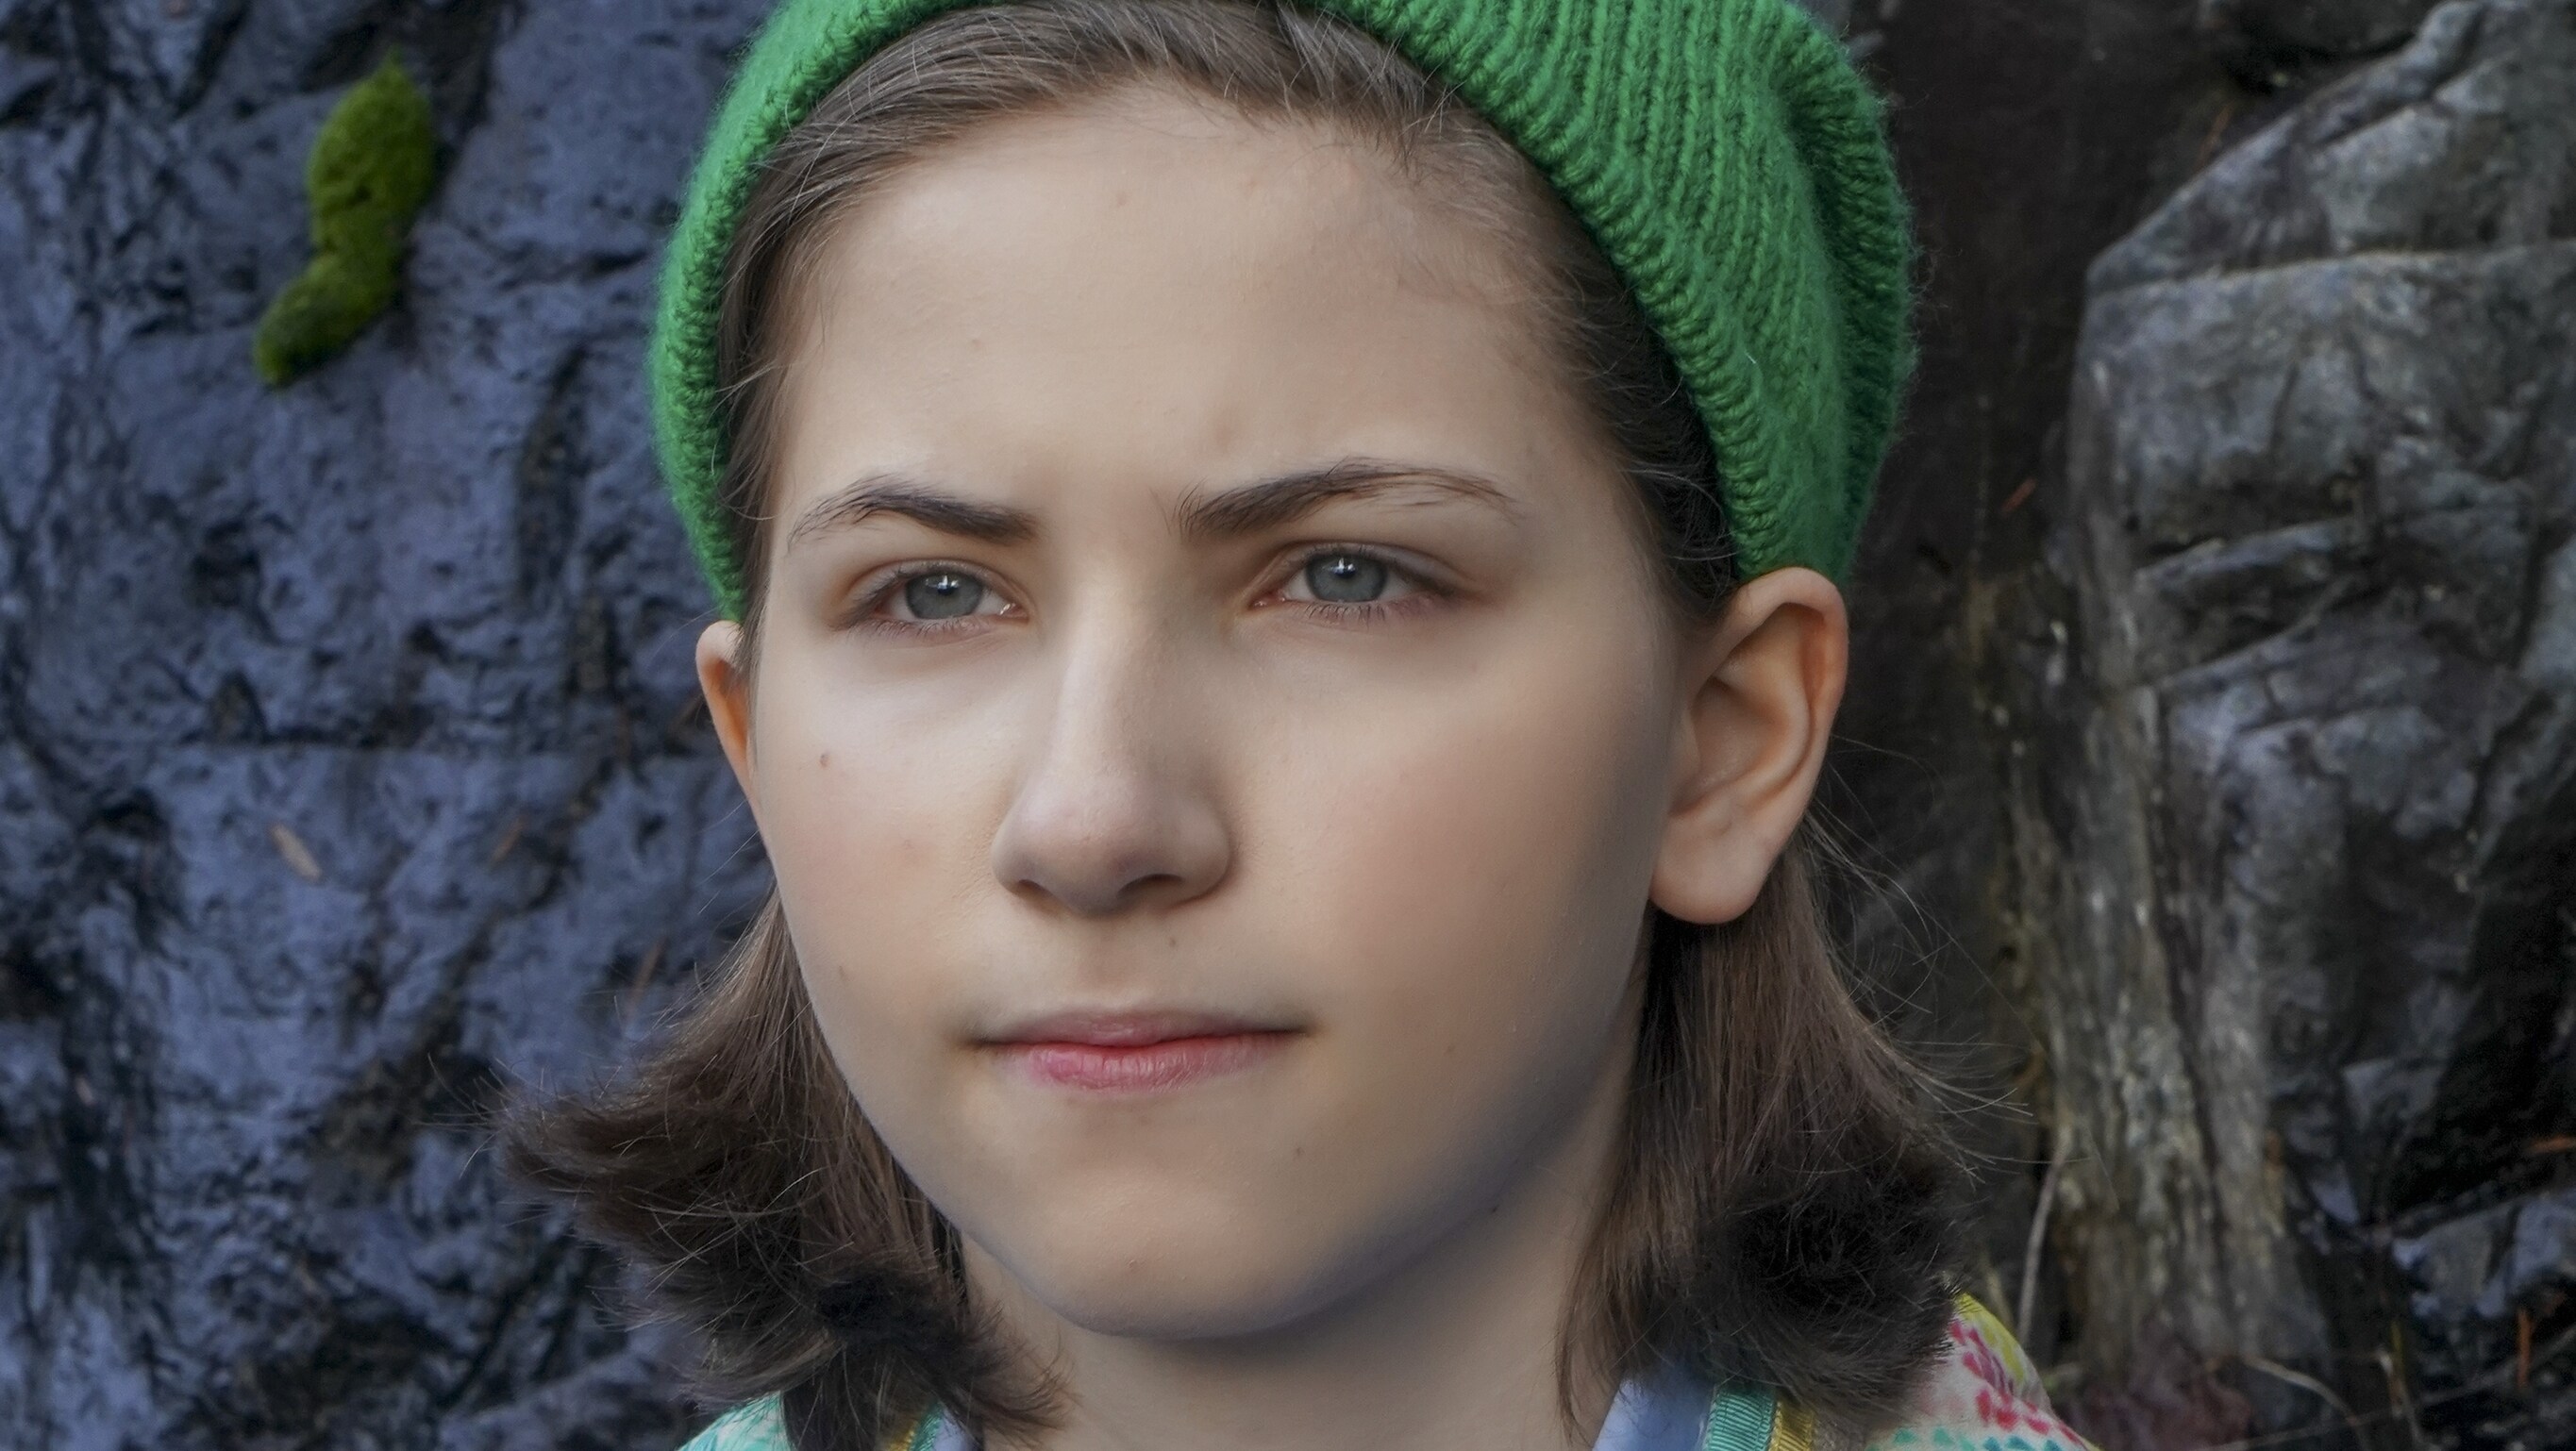 Emmy Deoliveira wearing a green beanie while playing a role in The Mysterious Benedict Society movie